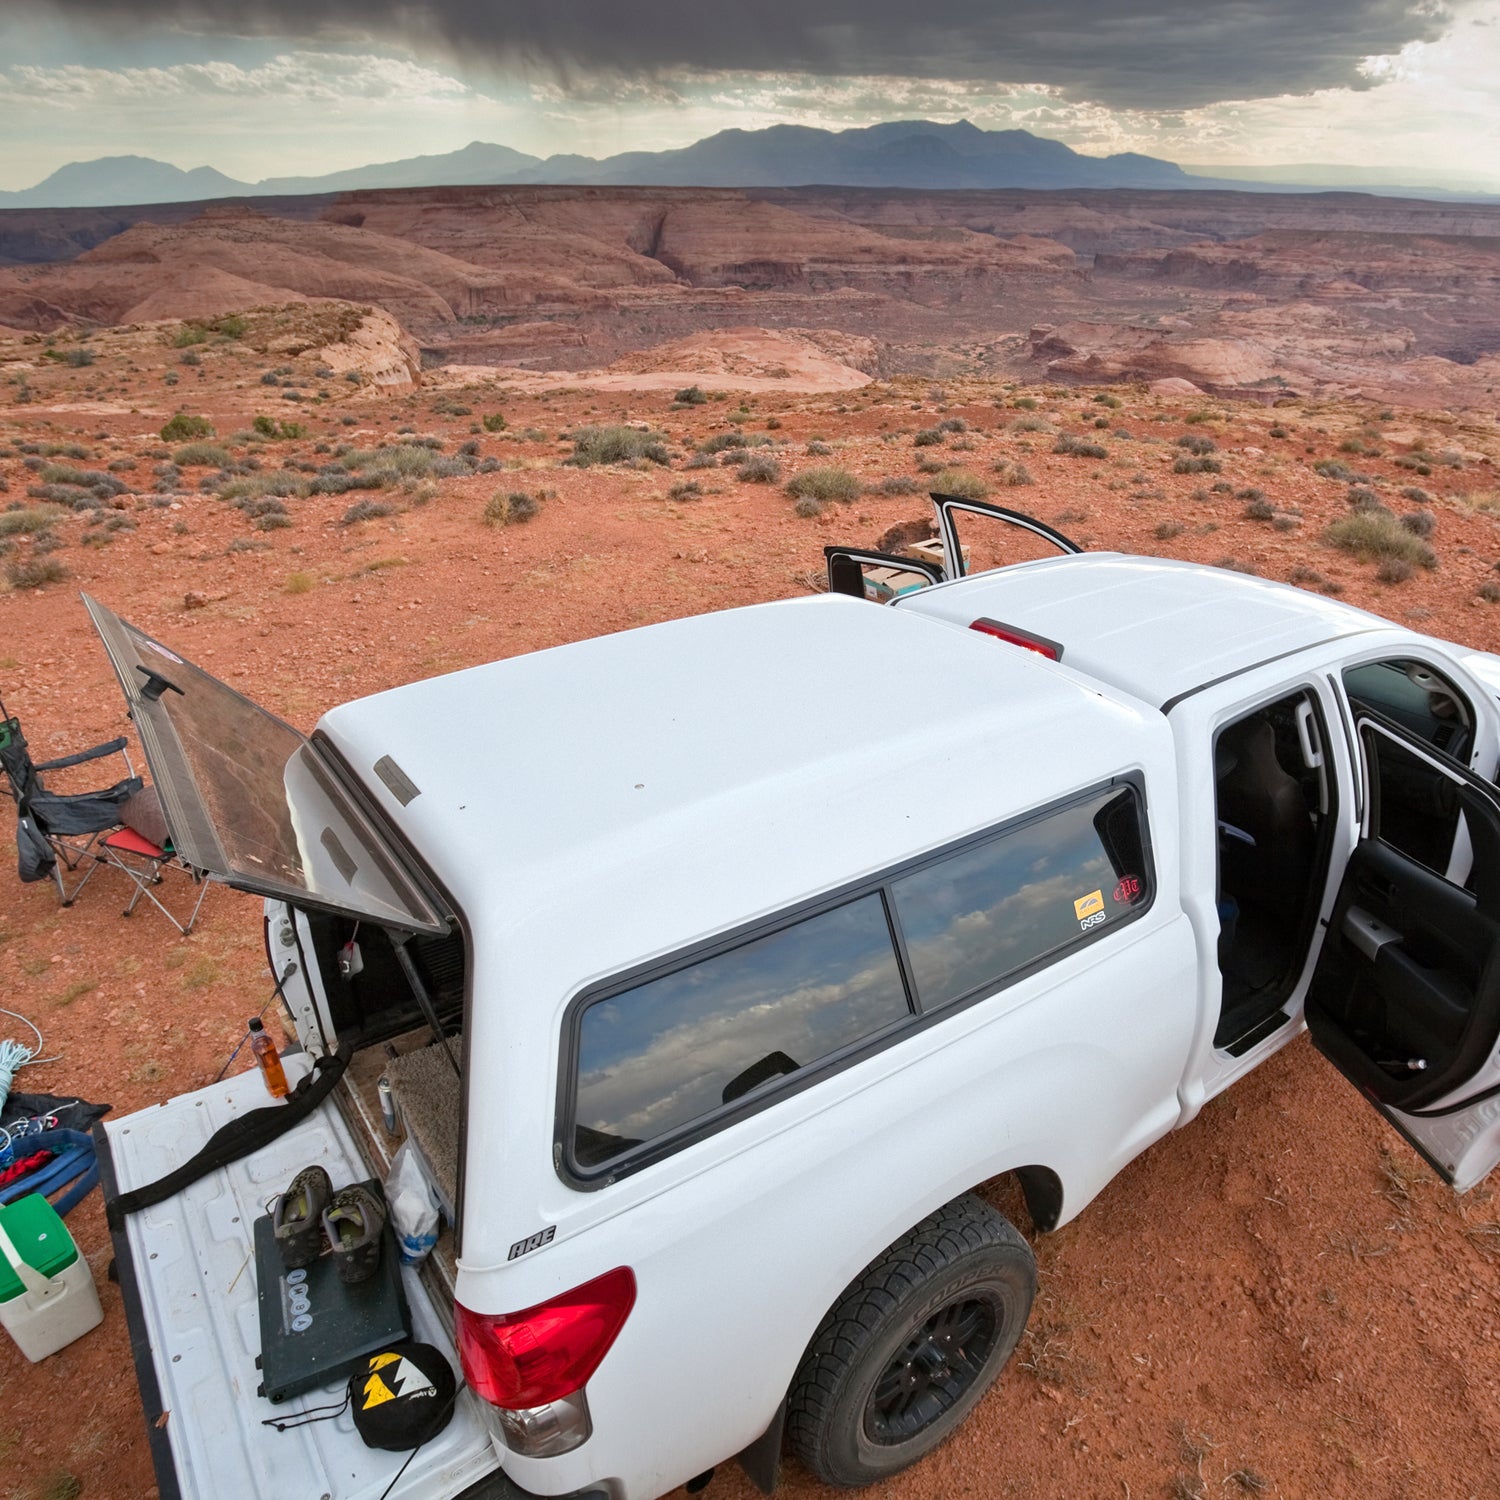 How Do I Turn My Truck into a Mobile Adventure Home?